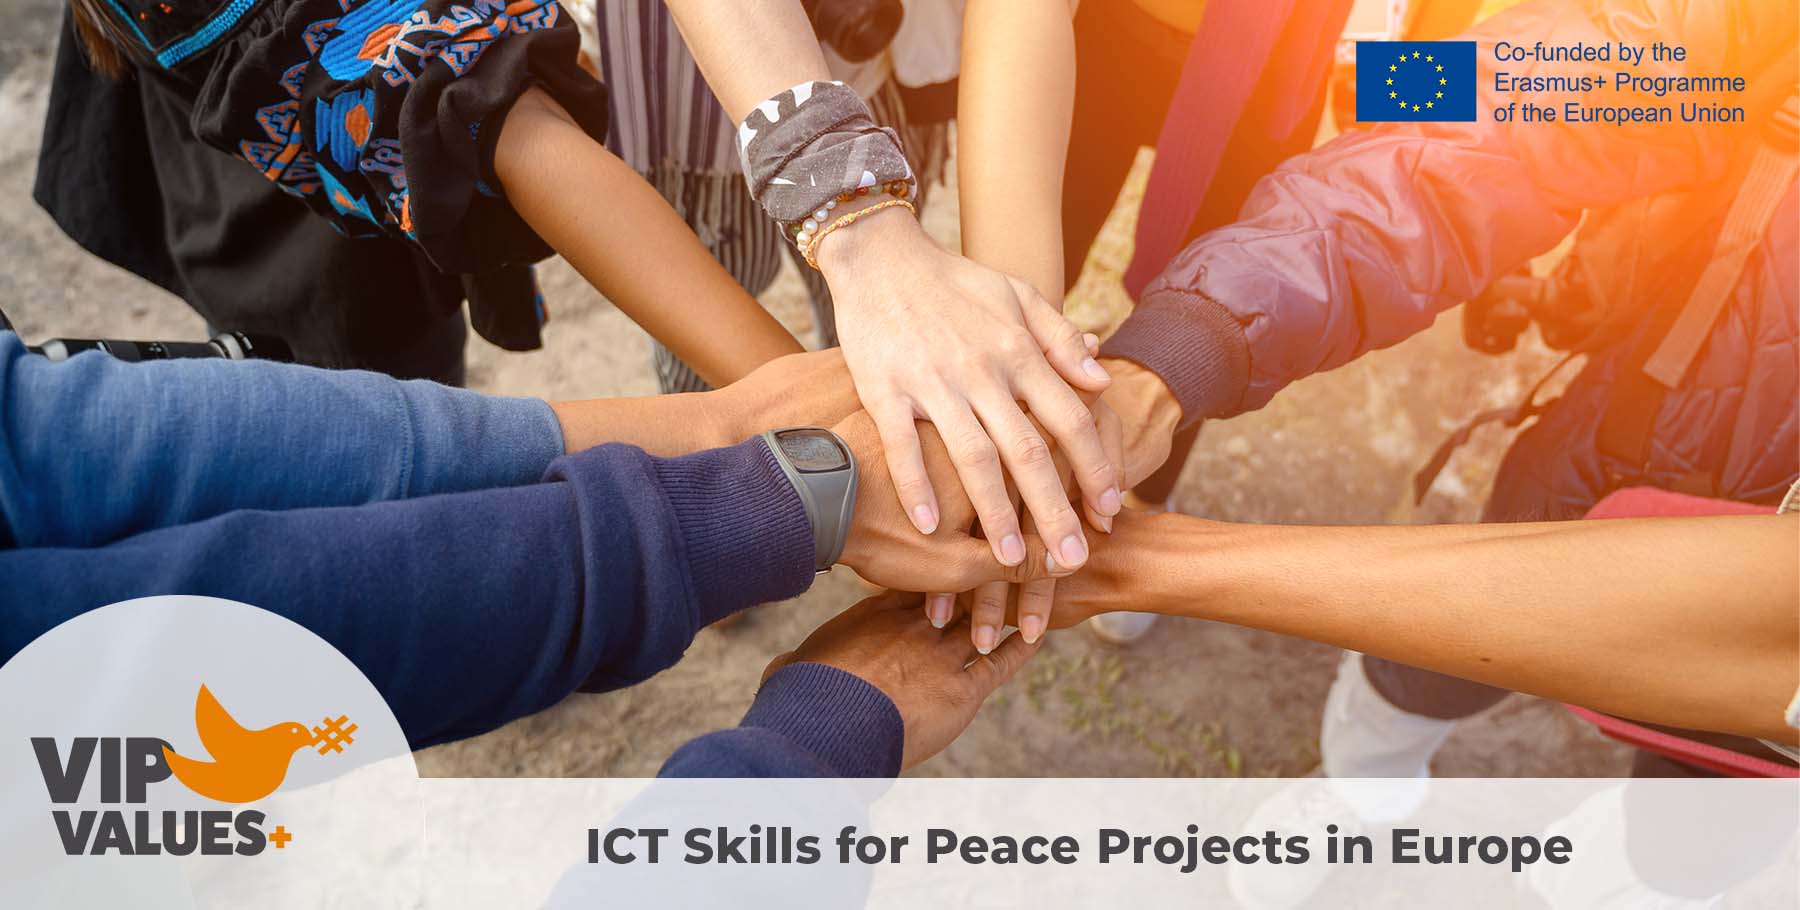 VIP VALUES+: ICT Skills for Peace Projects in Europe